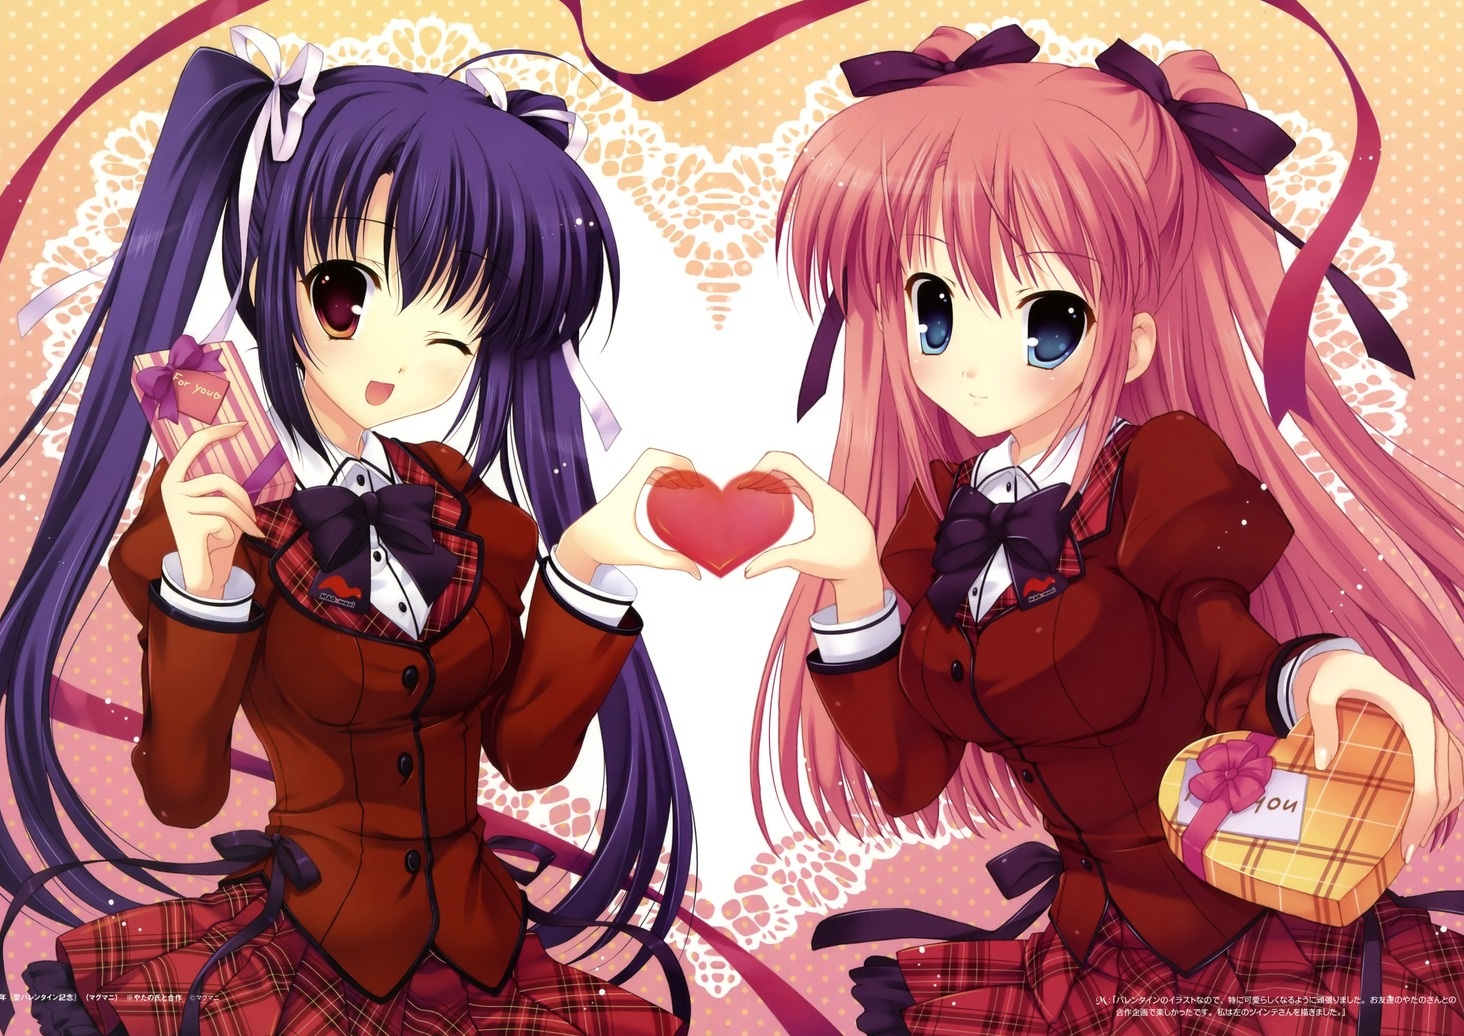 In This Anime Wallpaper Two Cute Anime Girls Are Making A Valentines